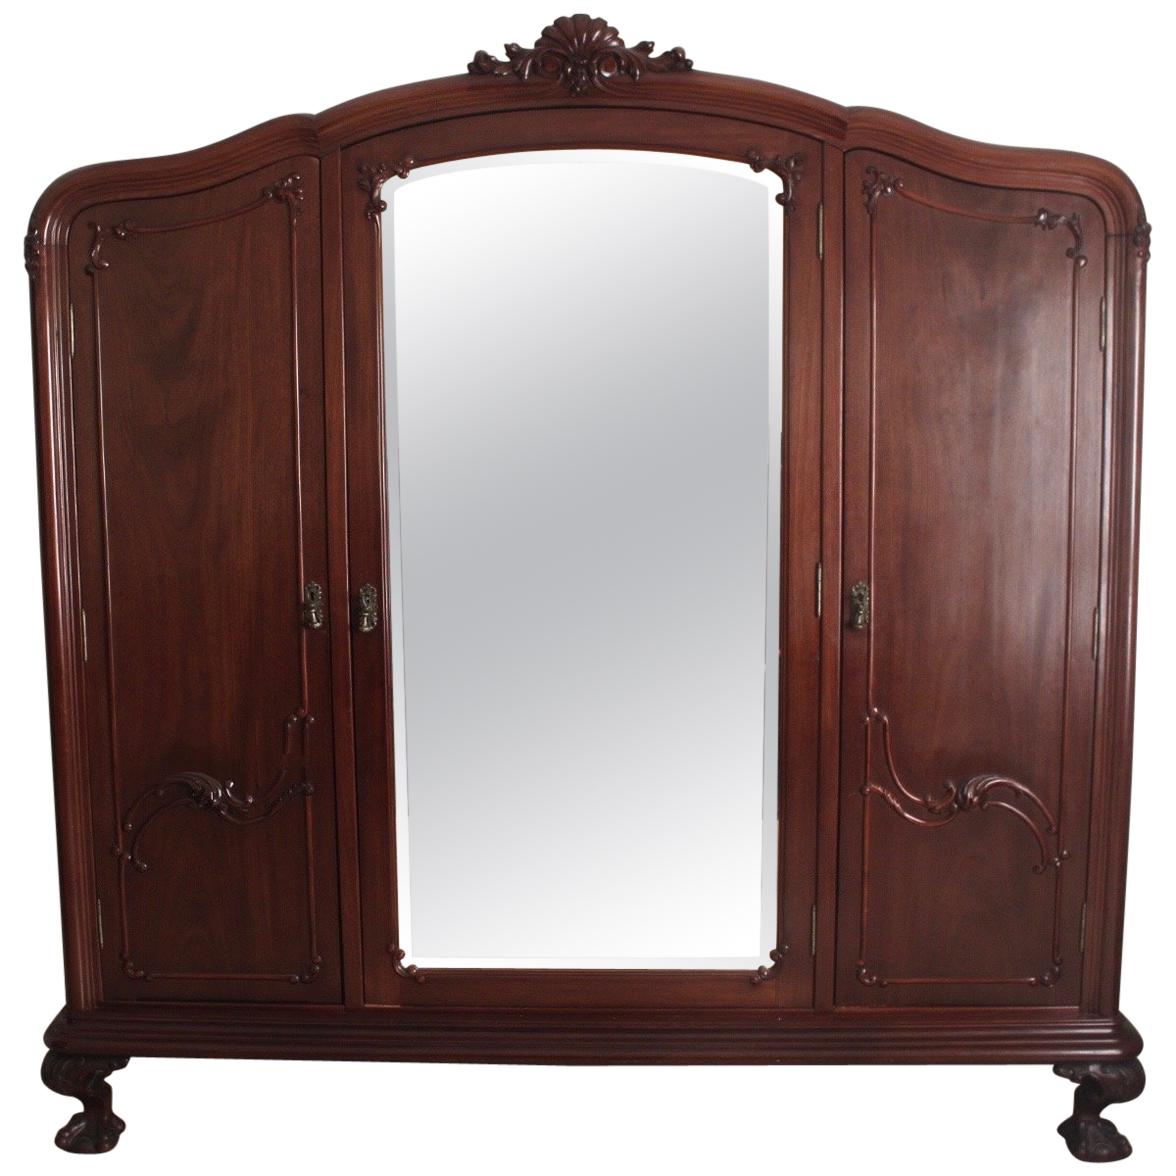 Chippendale Ball & Claw Mahogany Wood Armoire or Wardrobe with 3 Vanity Mirrors im Angebot